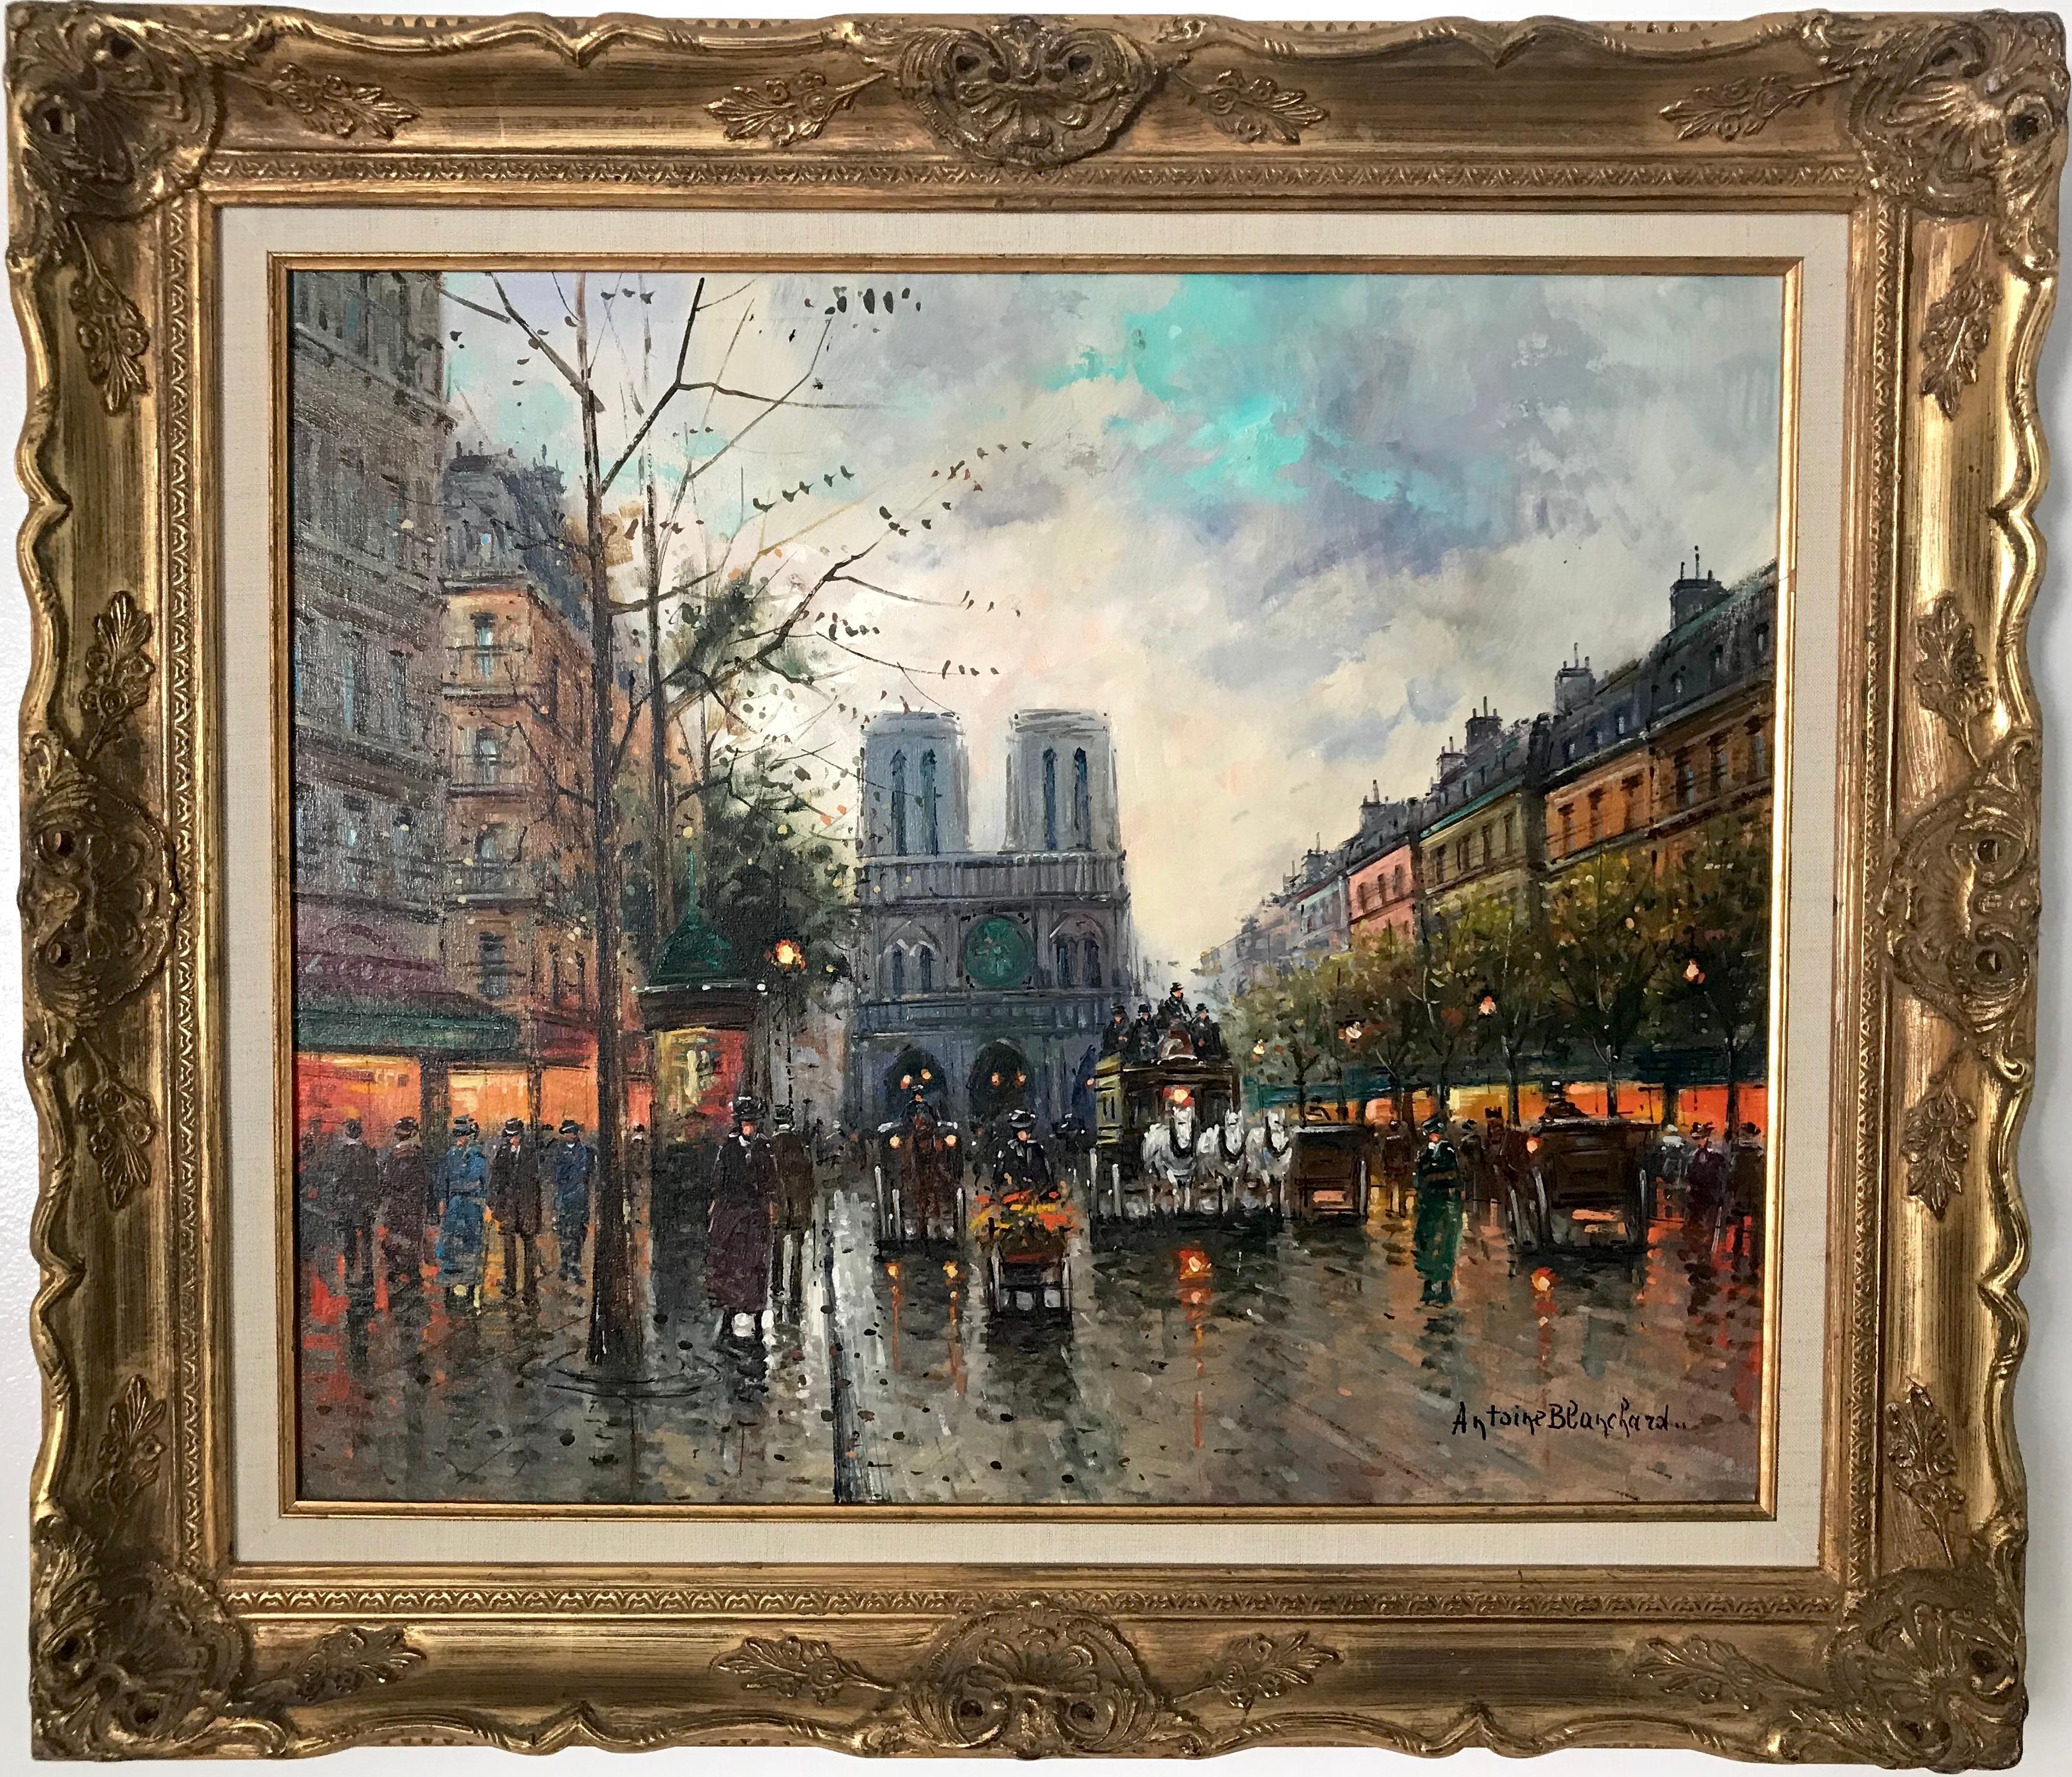 Antoine Blanchard is the pseudonym under which the French painter Marcel Masson (15 November 1910 – 1988)[1] painted his immensely popular Parisian street scenes. He was born in a small village near the banks of the Loire.

Education and